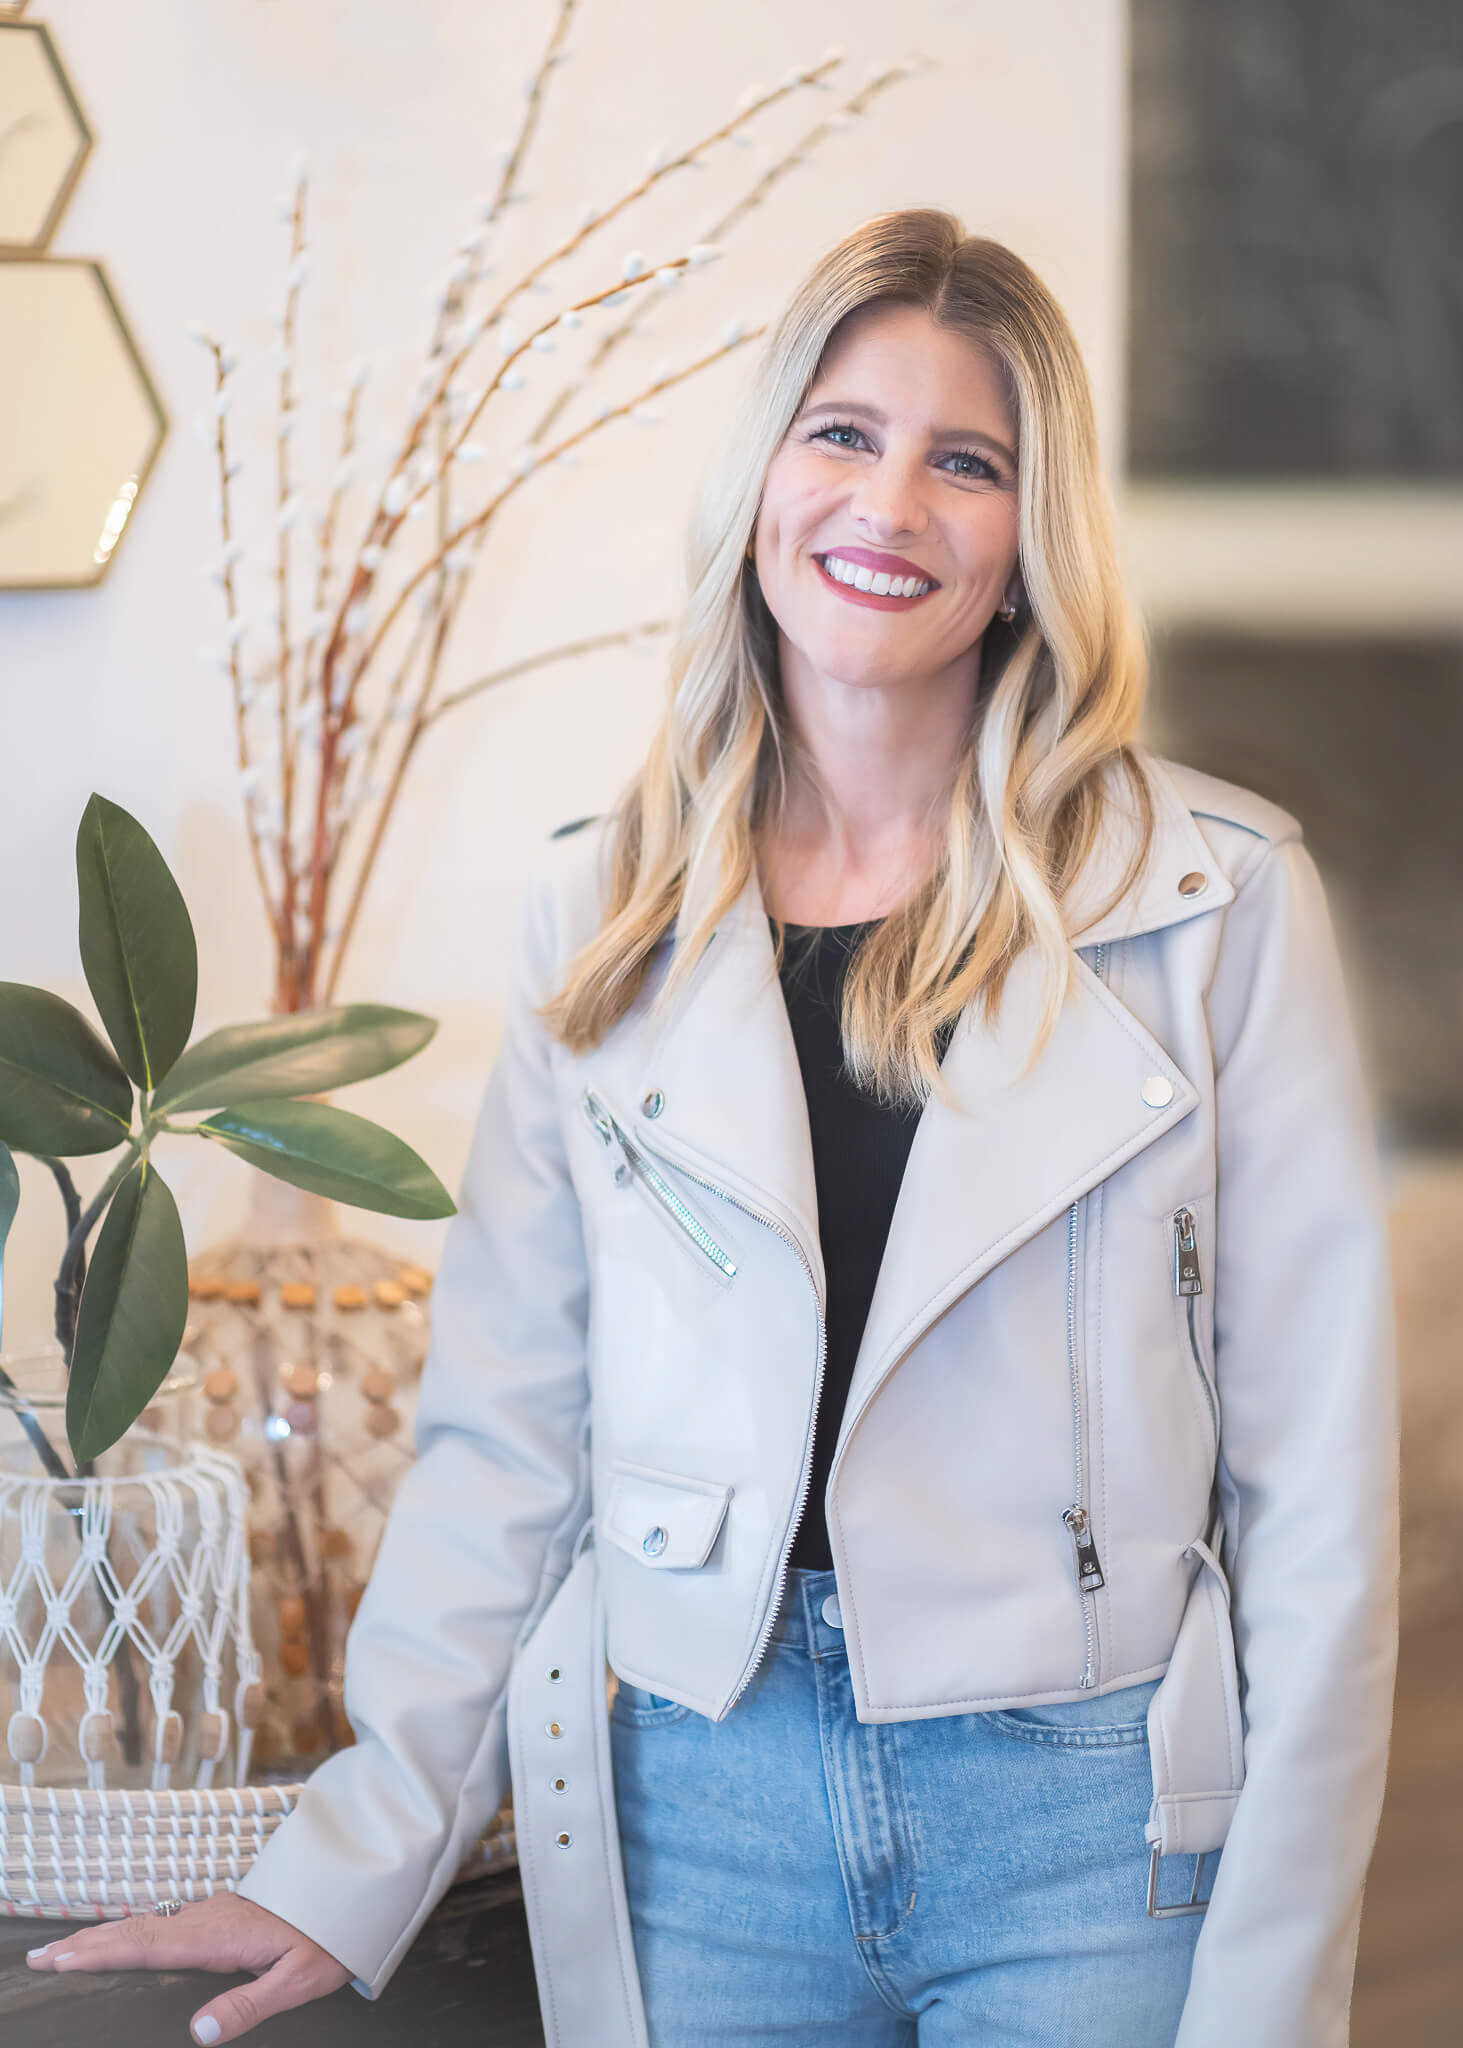 on-location headshot portrait of blonde woman wearing light colored leather jacket next to a console table with plants on it